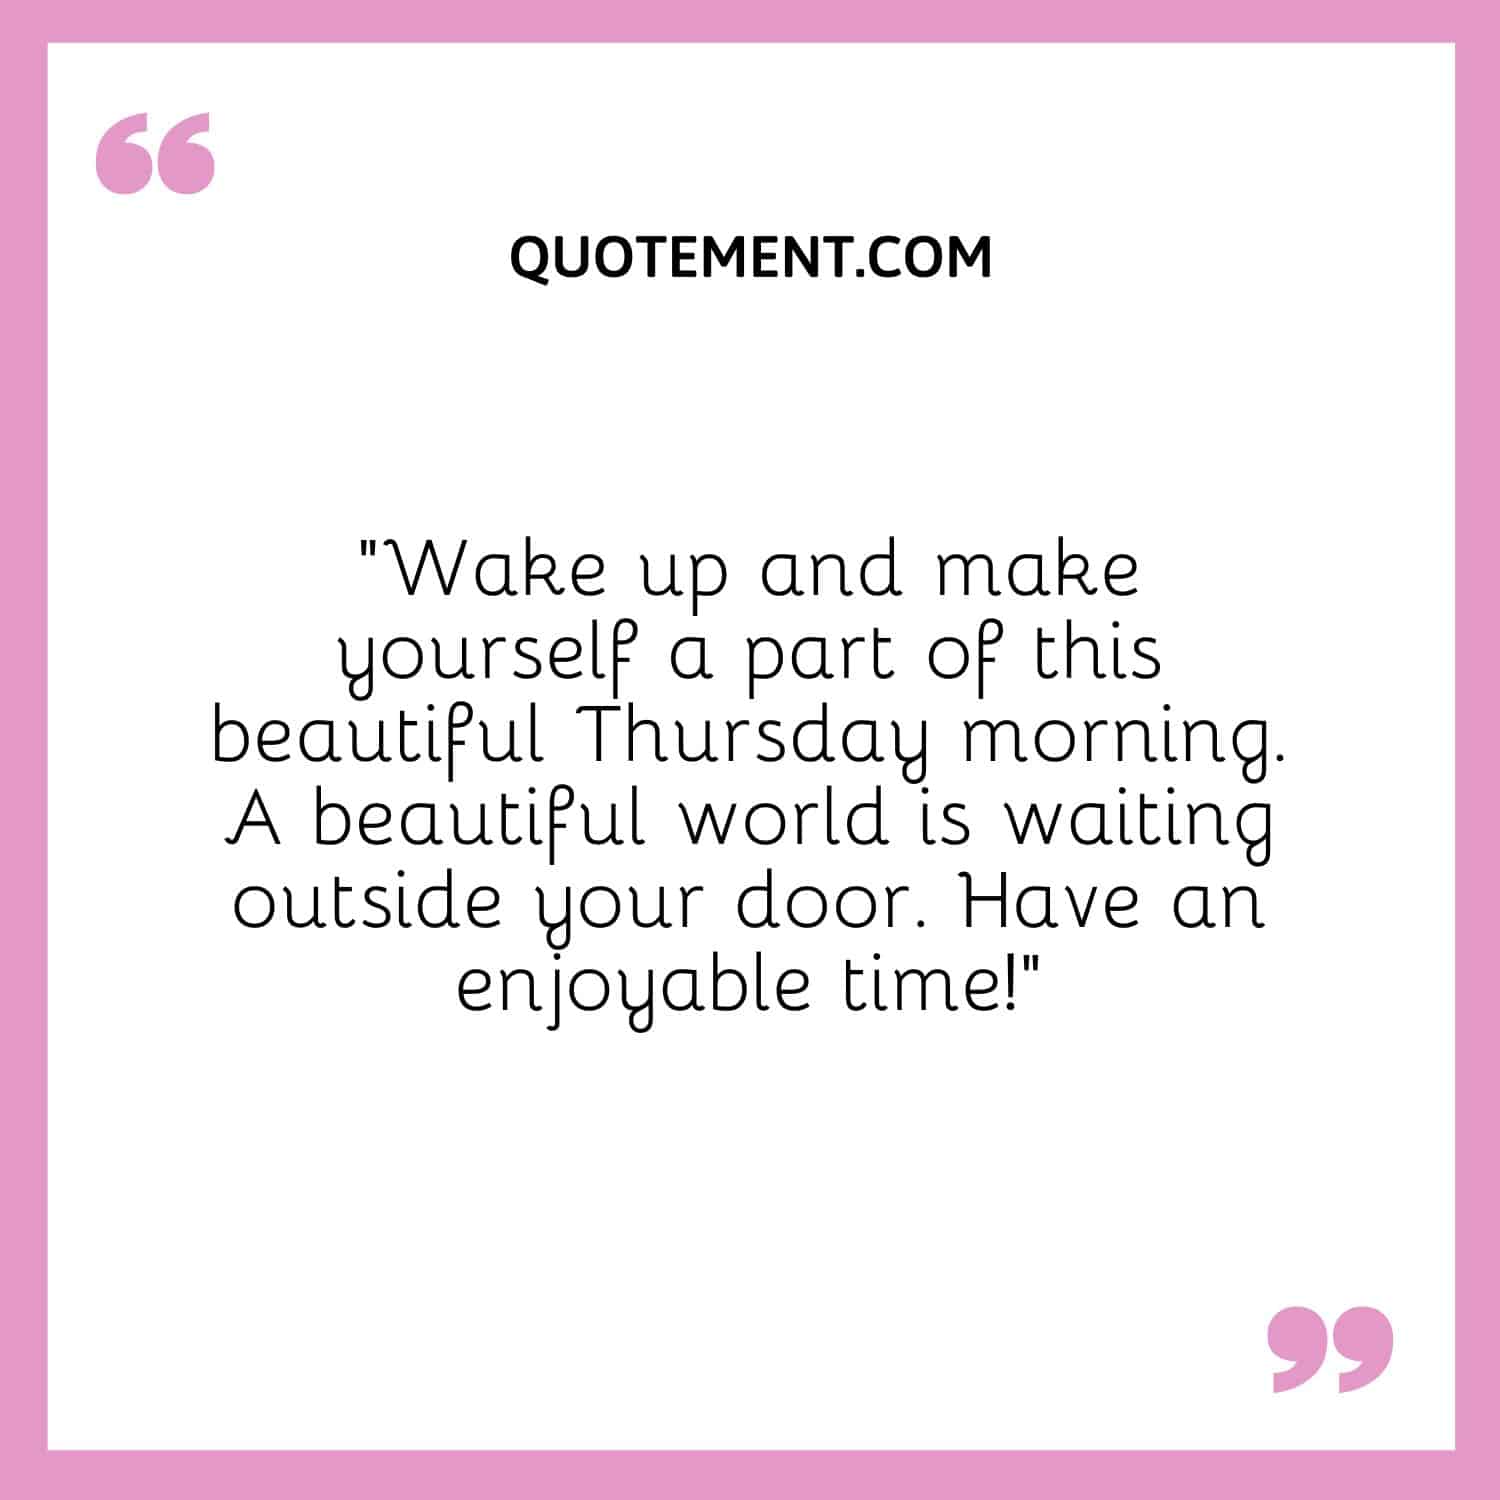 “Wake up and make yourself a part of this beautiful Thursday morning. A beautiful world is waiting outside your door. Have an enjoyable time!”